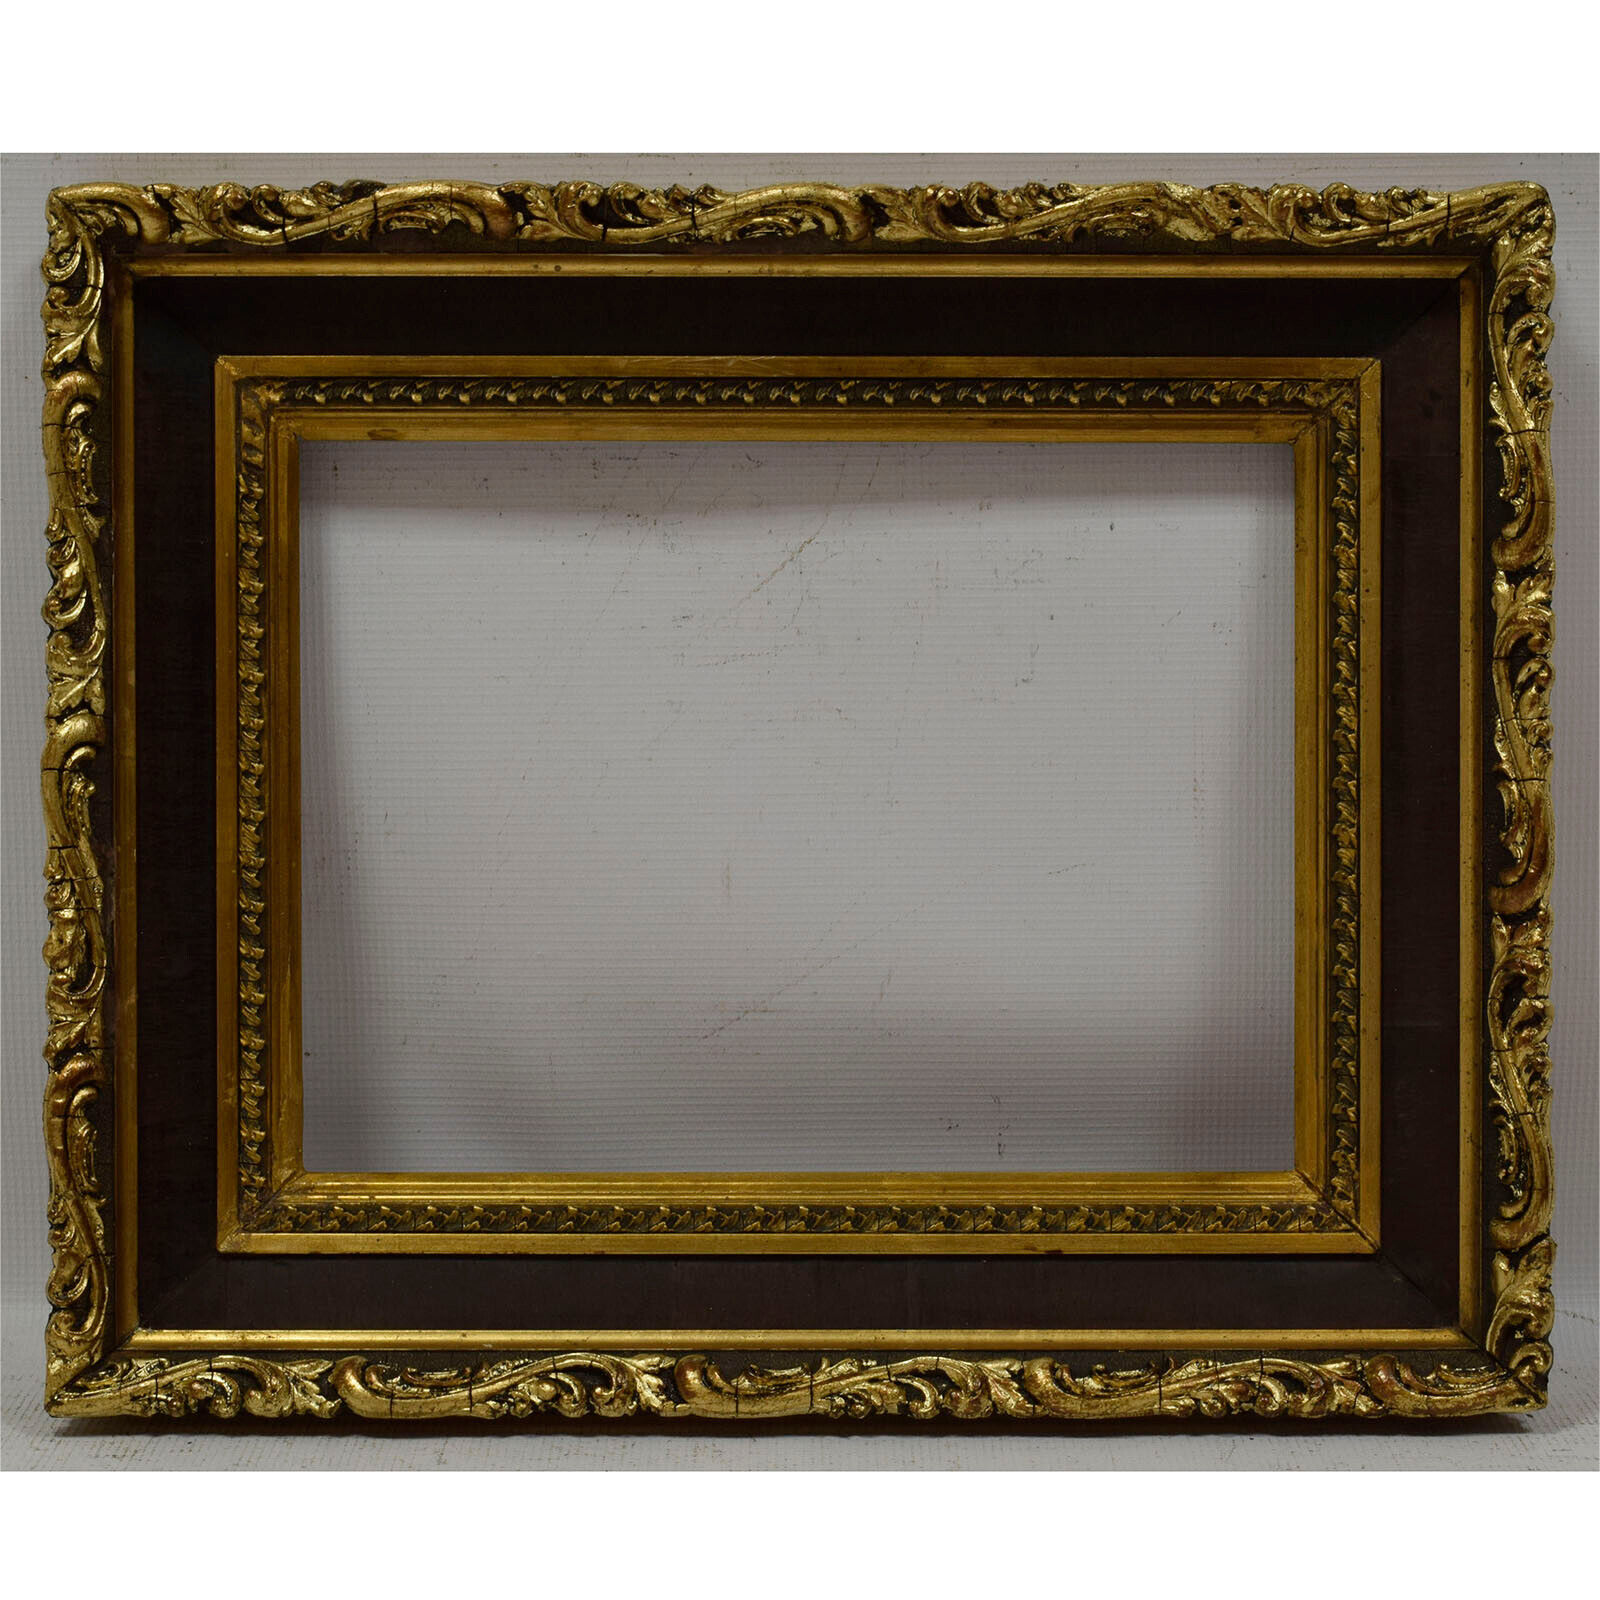 1898 Old wooden frame decorative with metal leaf Internal: 13.5x10.4 in